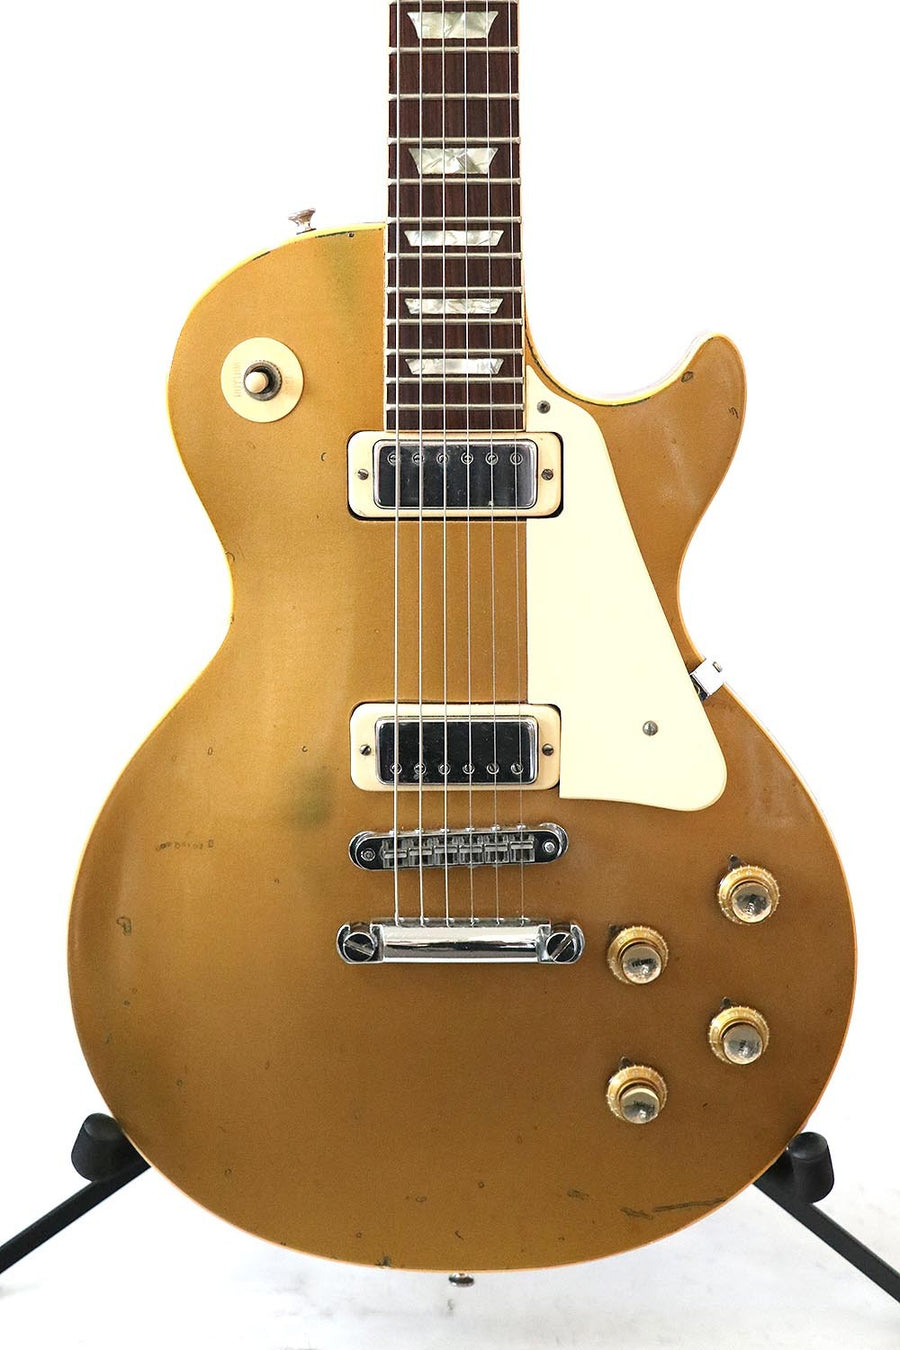 Gibson Les Paul Deluxe 1973 – The Guitar Colonel